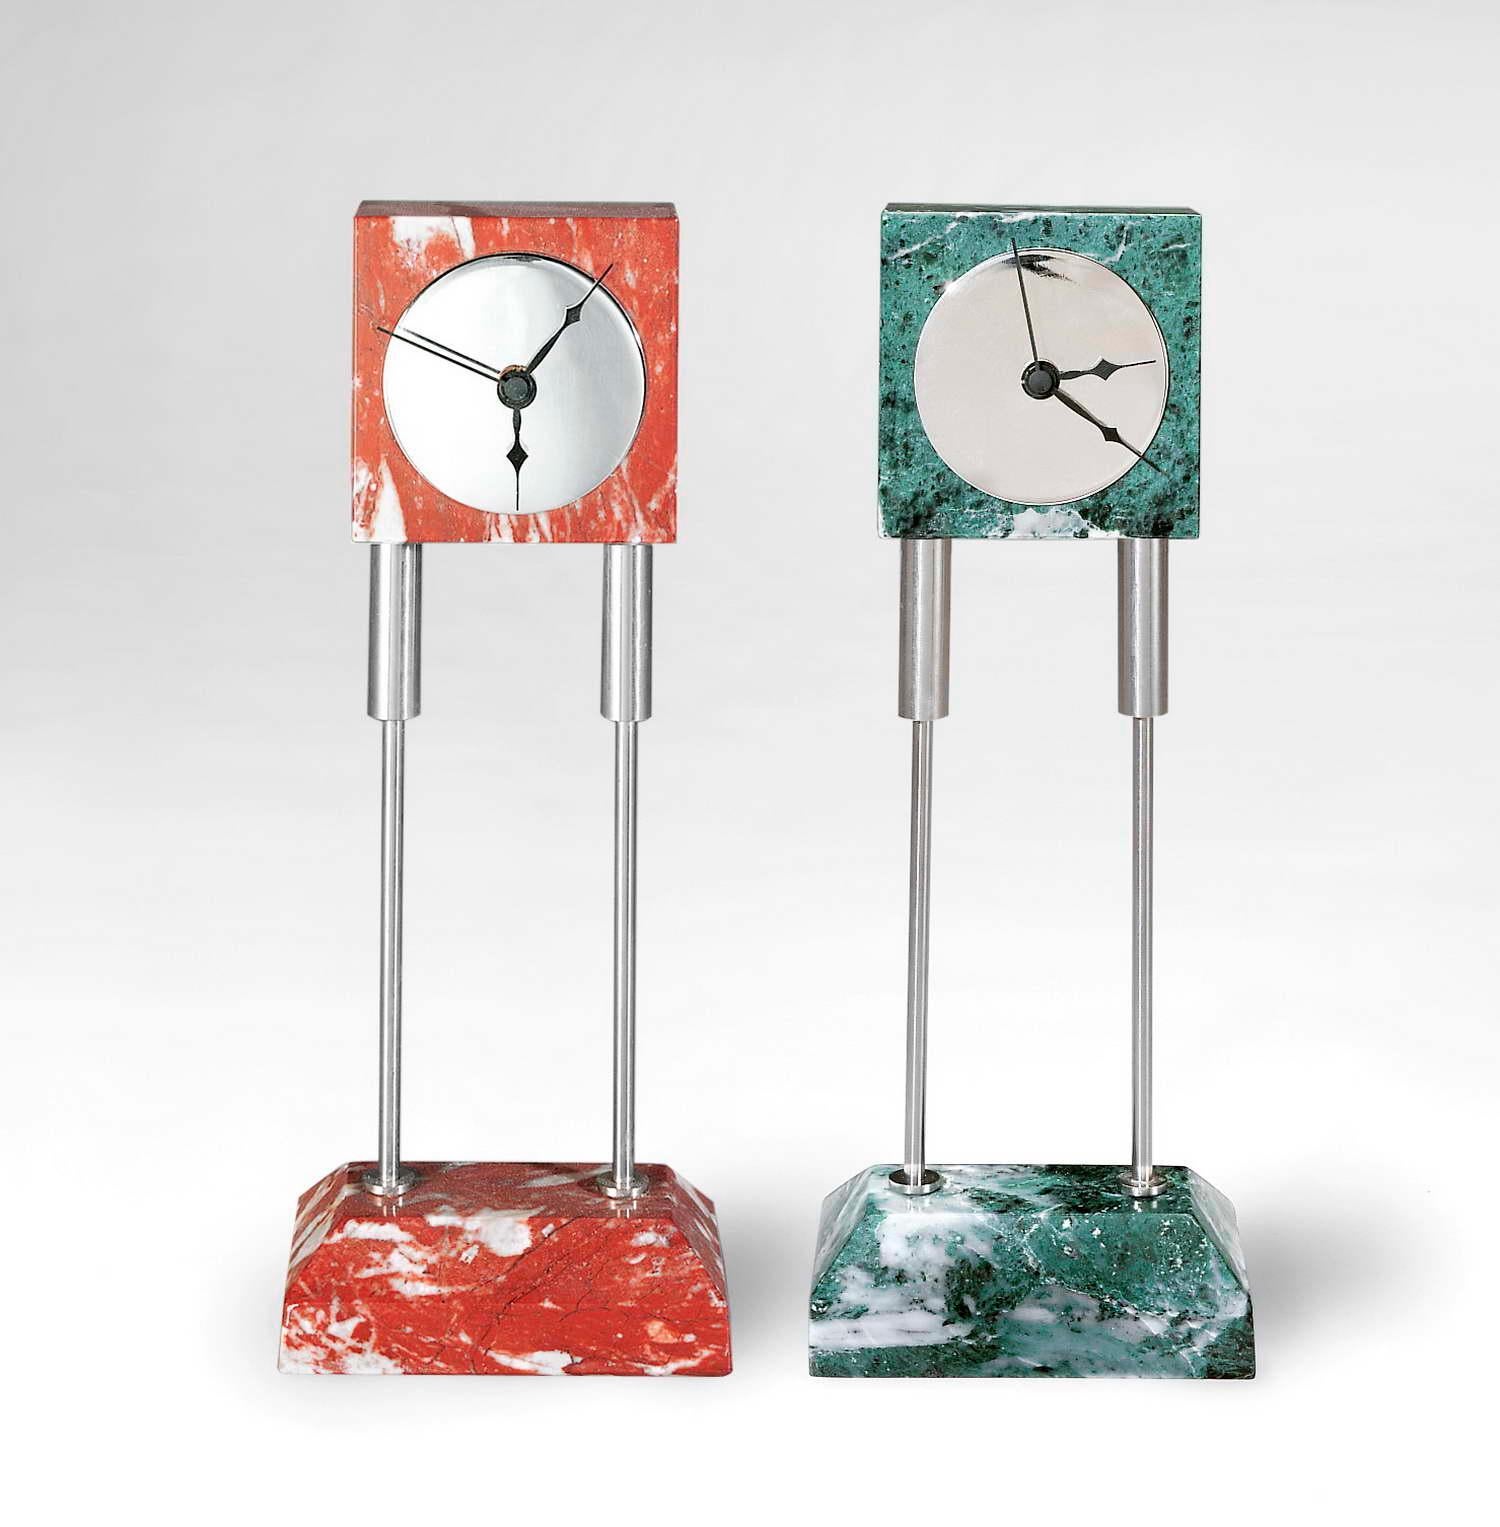 Marble clock designed by Arch. David Palterer.

Size: cm. 10.5 x 6 x 26 H.
Materials: Rosso Francia / Verde Alpi
Designed by: David Palterer.